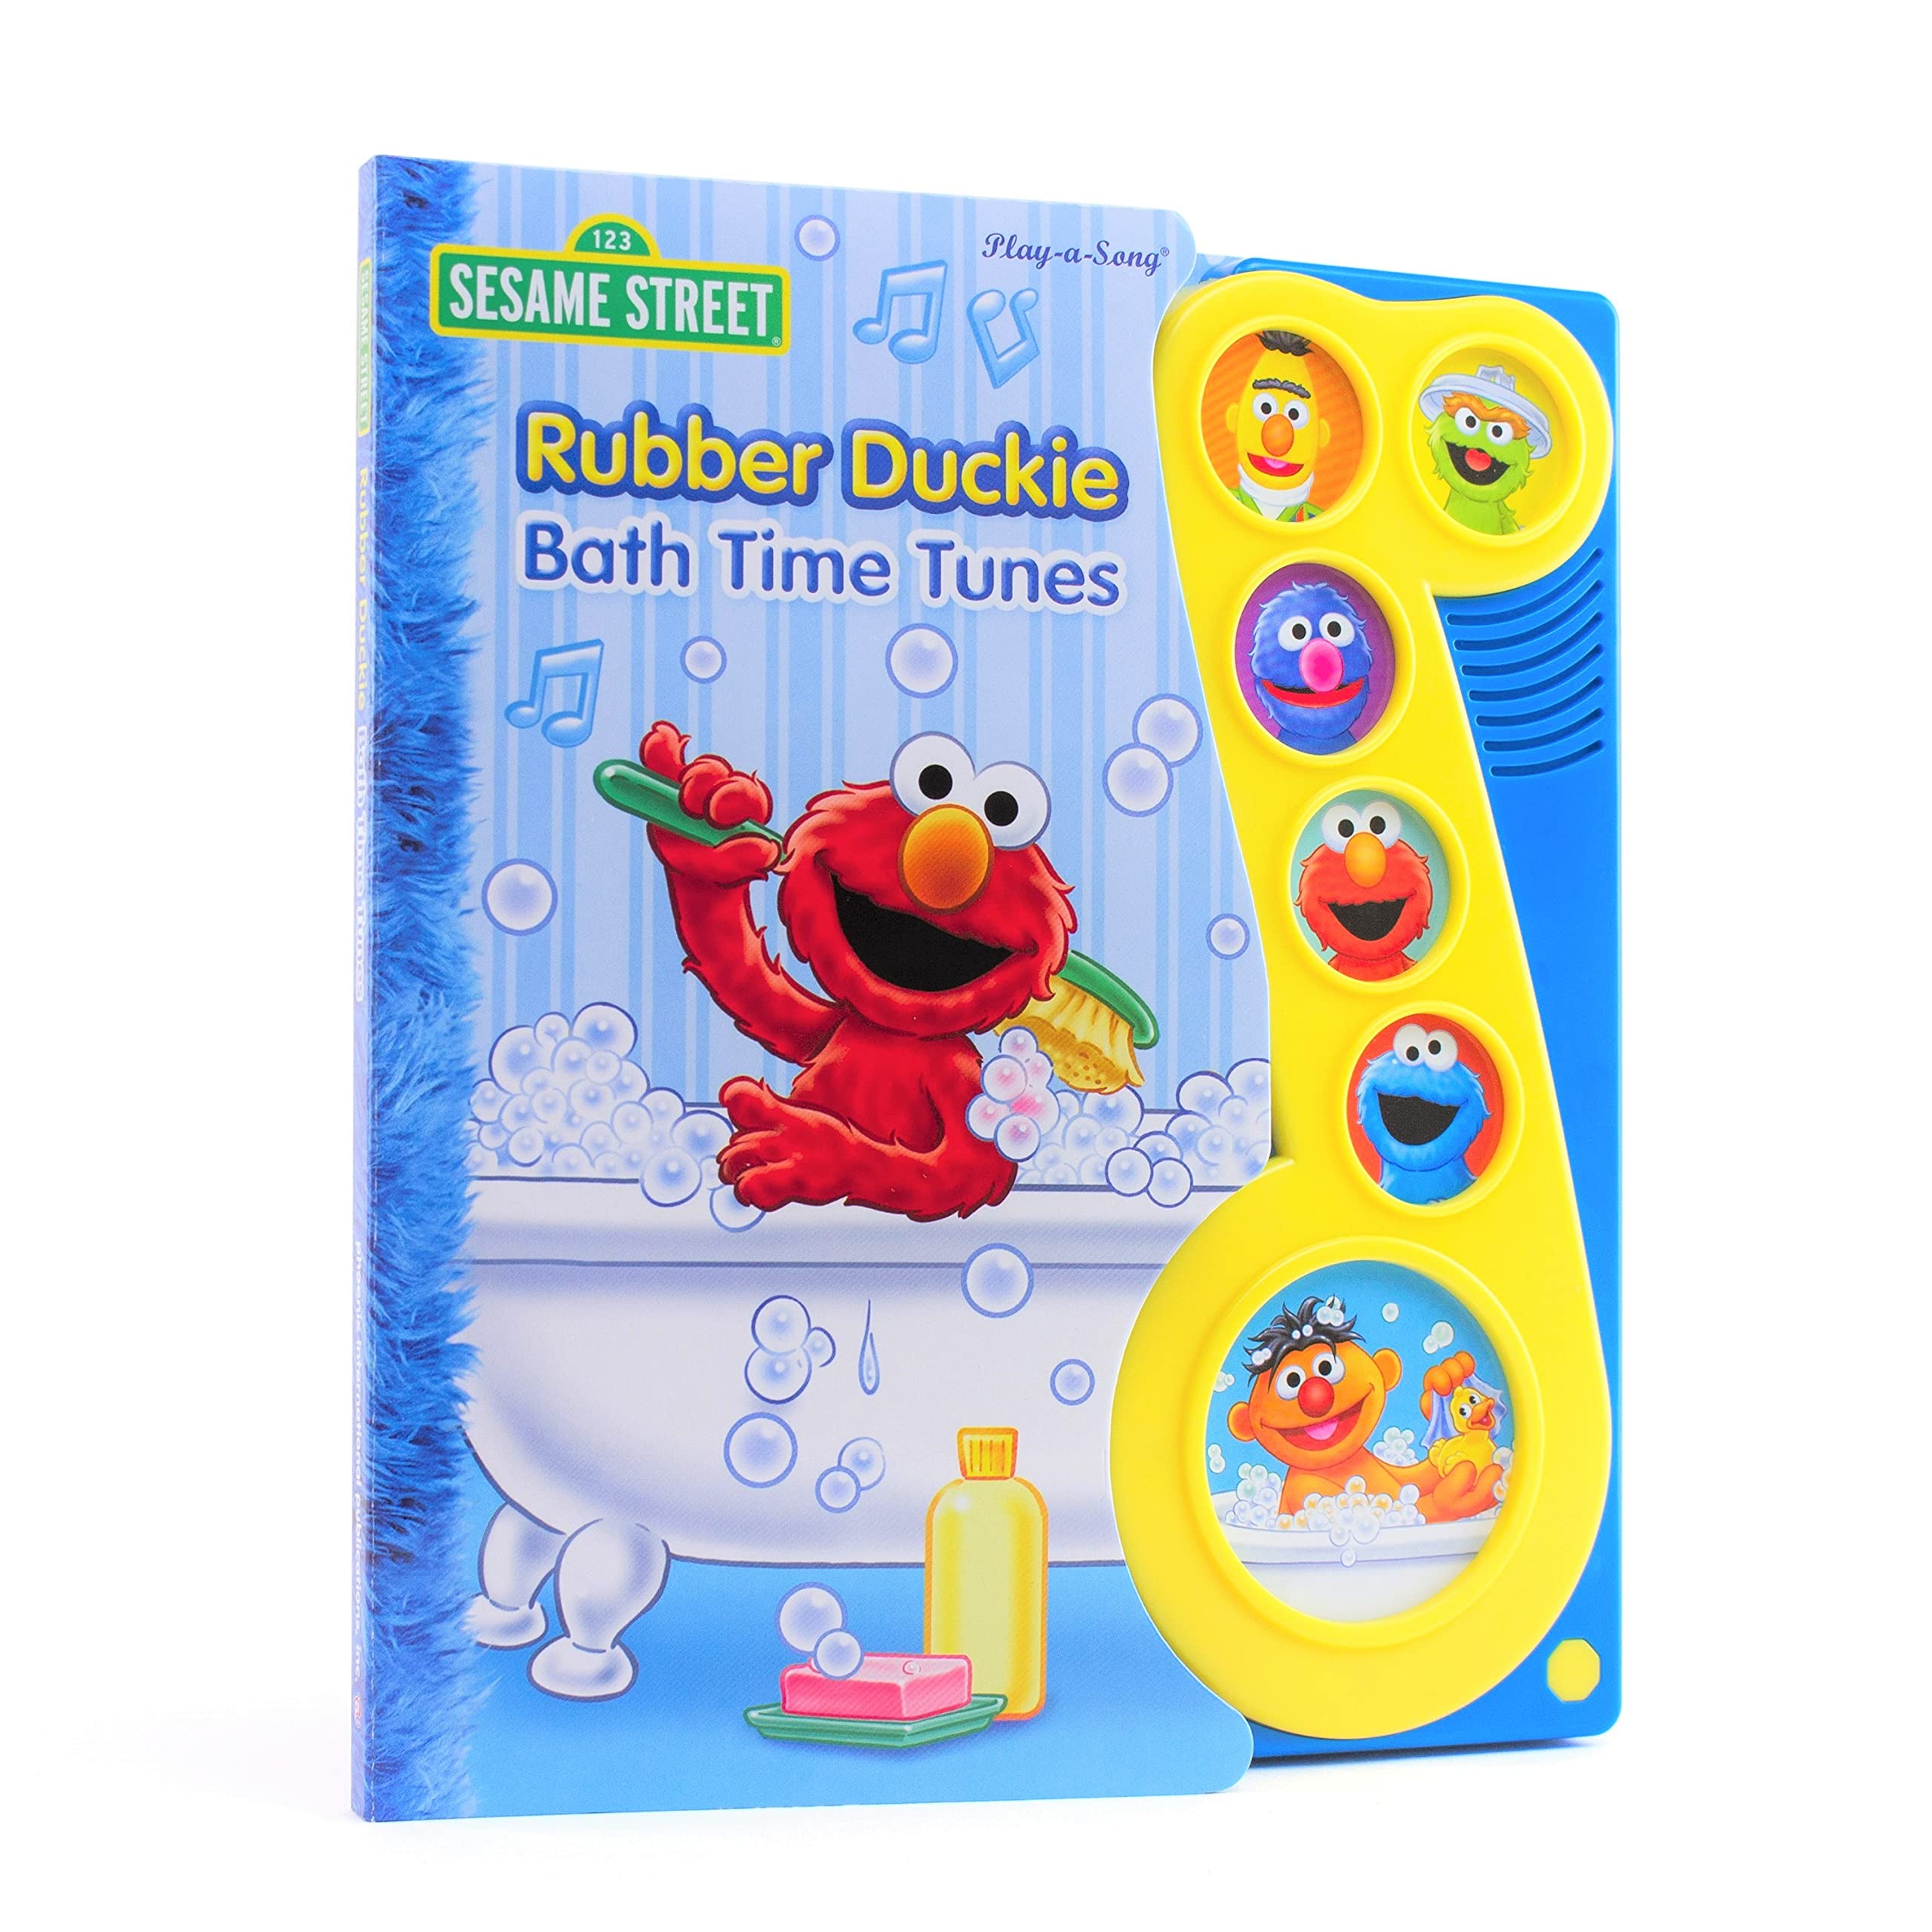 Sesame Street - Rubber Duckie Bath Time Tunes Sound Book - PI Kids (Play-A-Song)